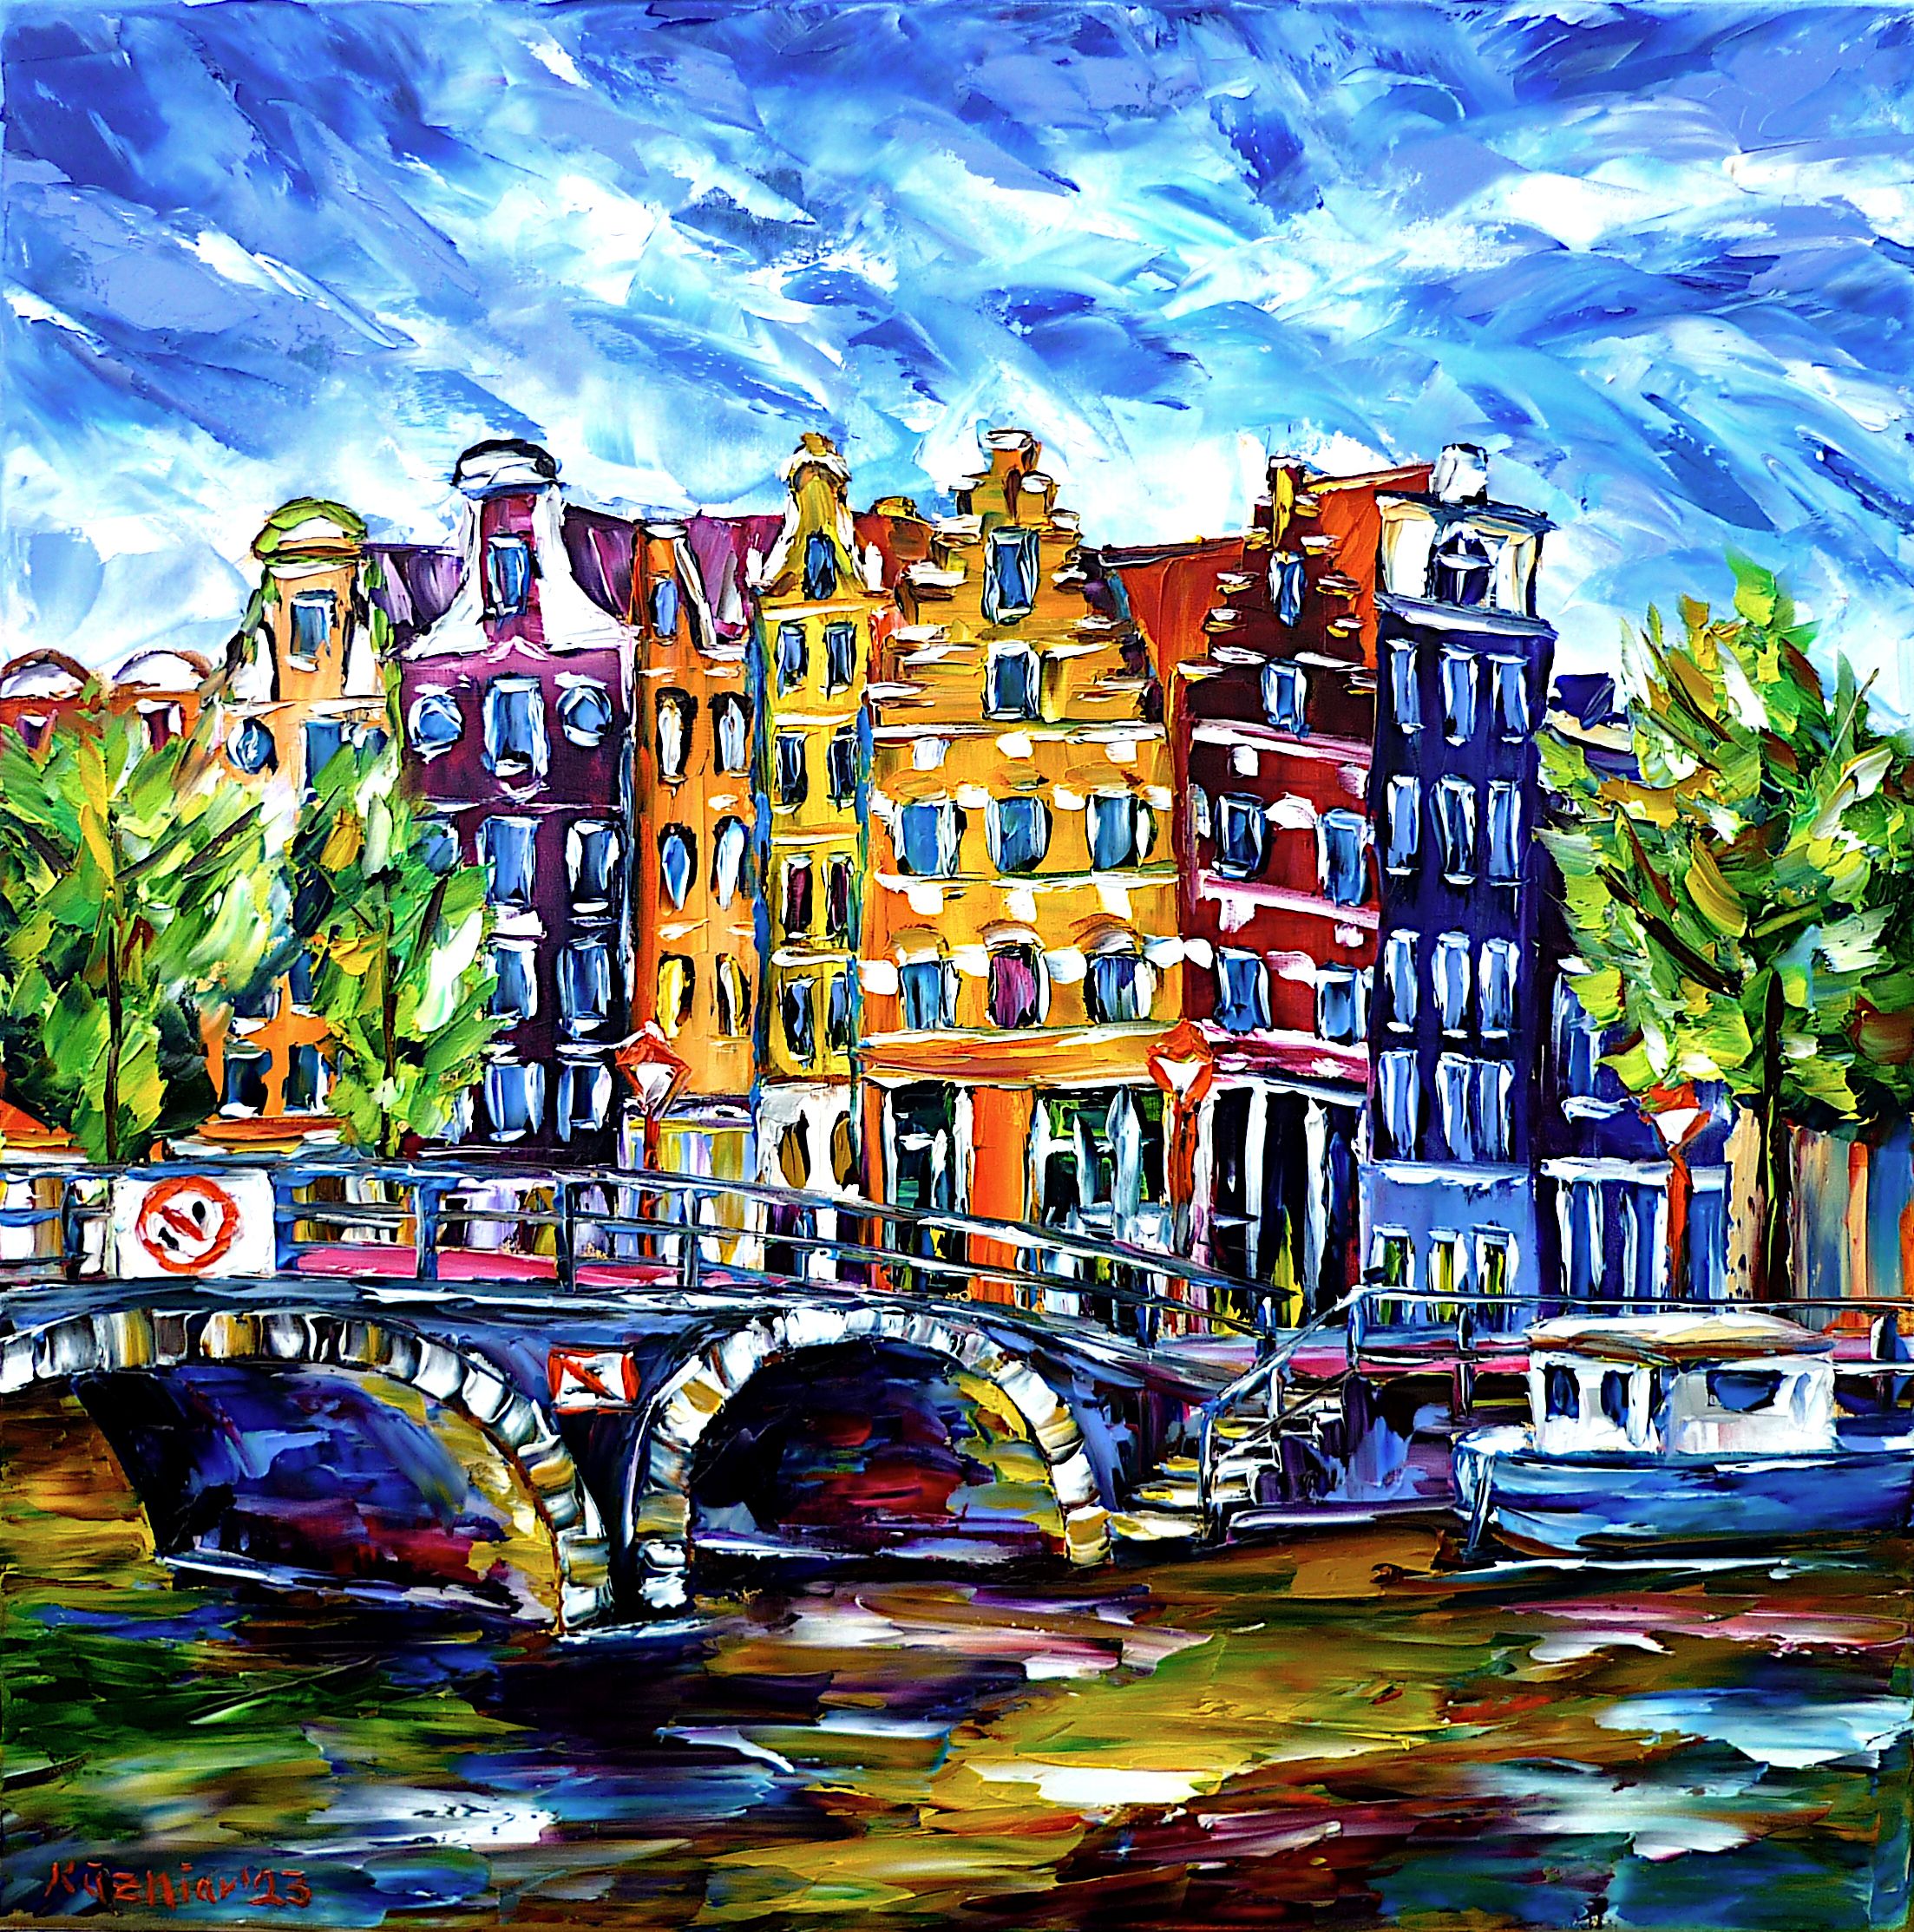 amsterdam picture,amsterdam painting,houses of amsterdam,amsterdam water canal,amsterdam canals,amsterdam river,amsterdam bridge,amsterdam art,water reflections,colorful amsterdam,old amsterdam,sky over amsterdam,beautiful amsterdam,amsterdam cityscape,colorful houses,amsterdam beauty,amsterdam love,amsterdam lovers,i love amsterdam,beautiful city,holland,netherlands,square painting,square format,square picture,palette knife oil painting,modern art,figurative art,figurative painting,contemporary painting,abstract painting,lively colors,colorful painting,bright colors,impasto painting